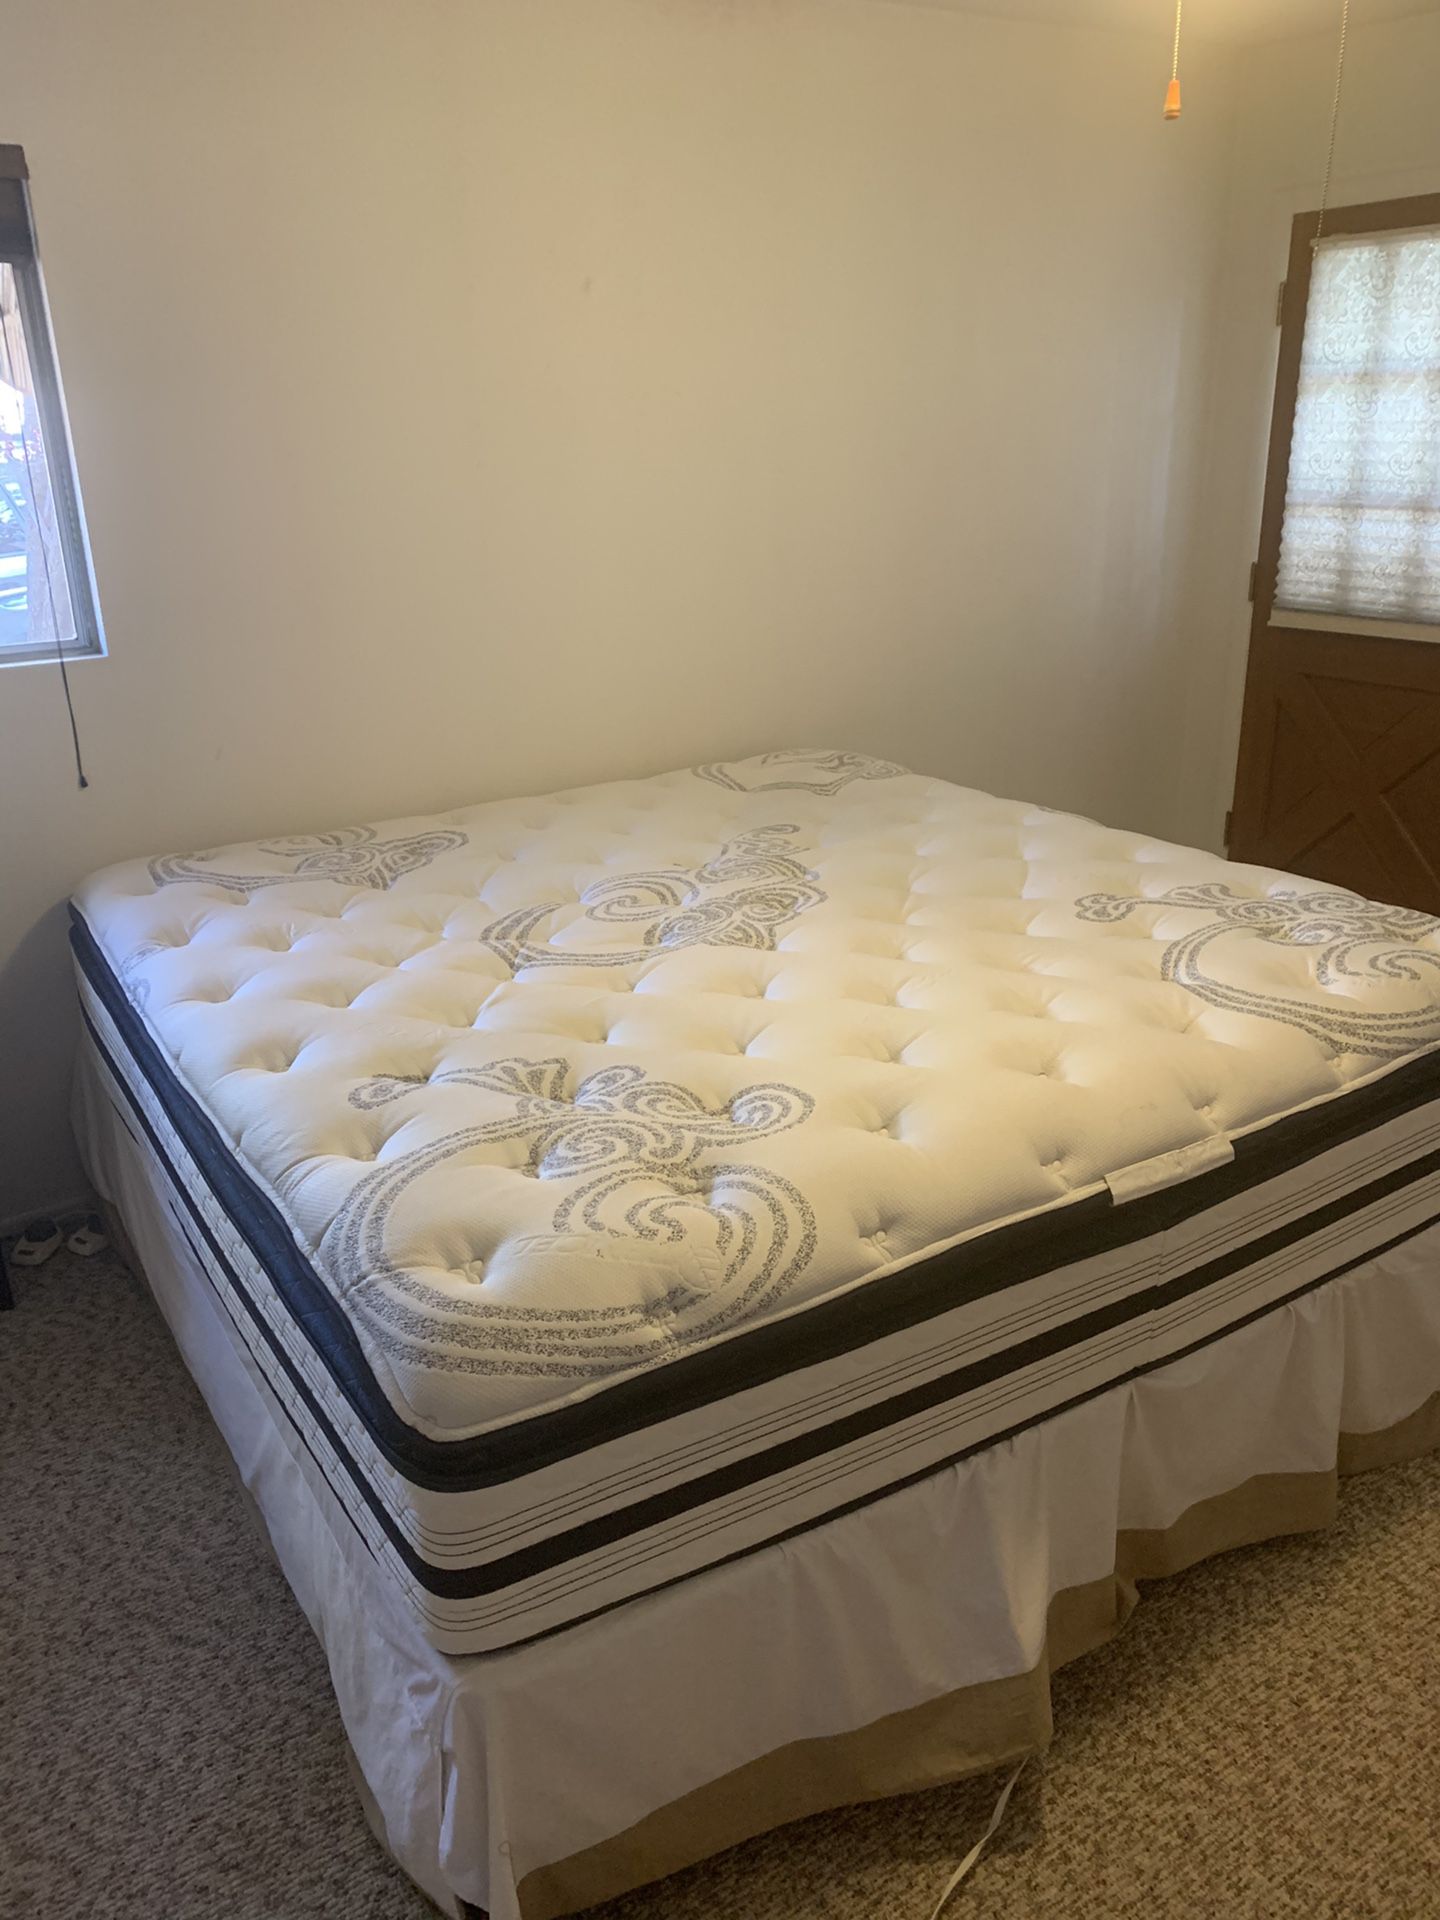 King bed, pillow top, great condition, $150, CLEAN!!!